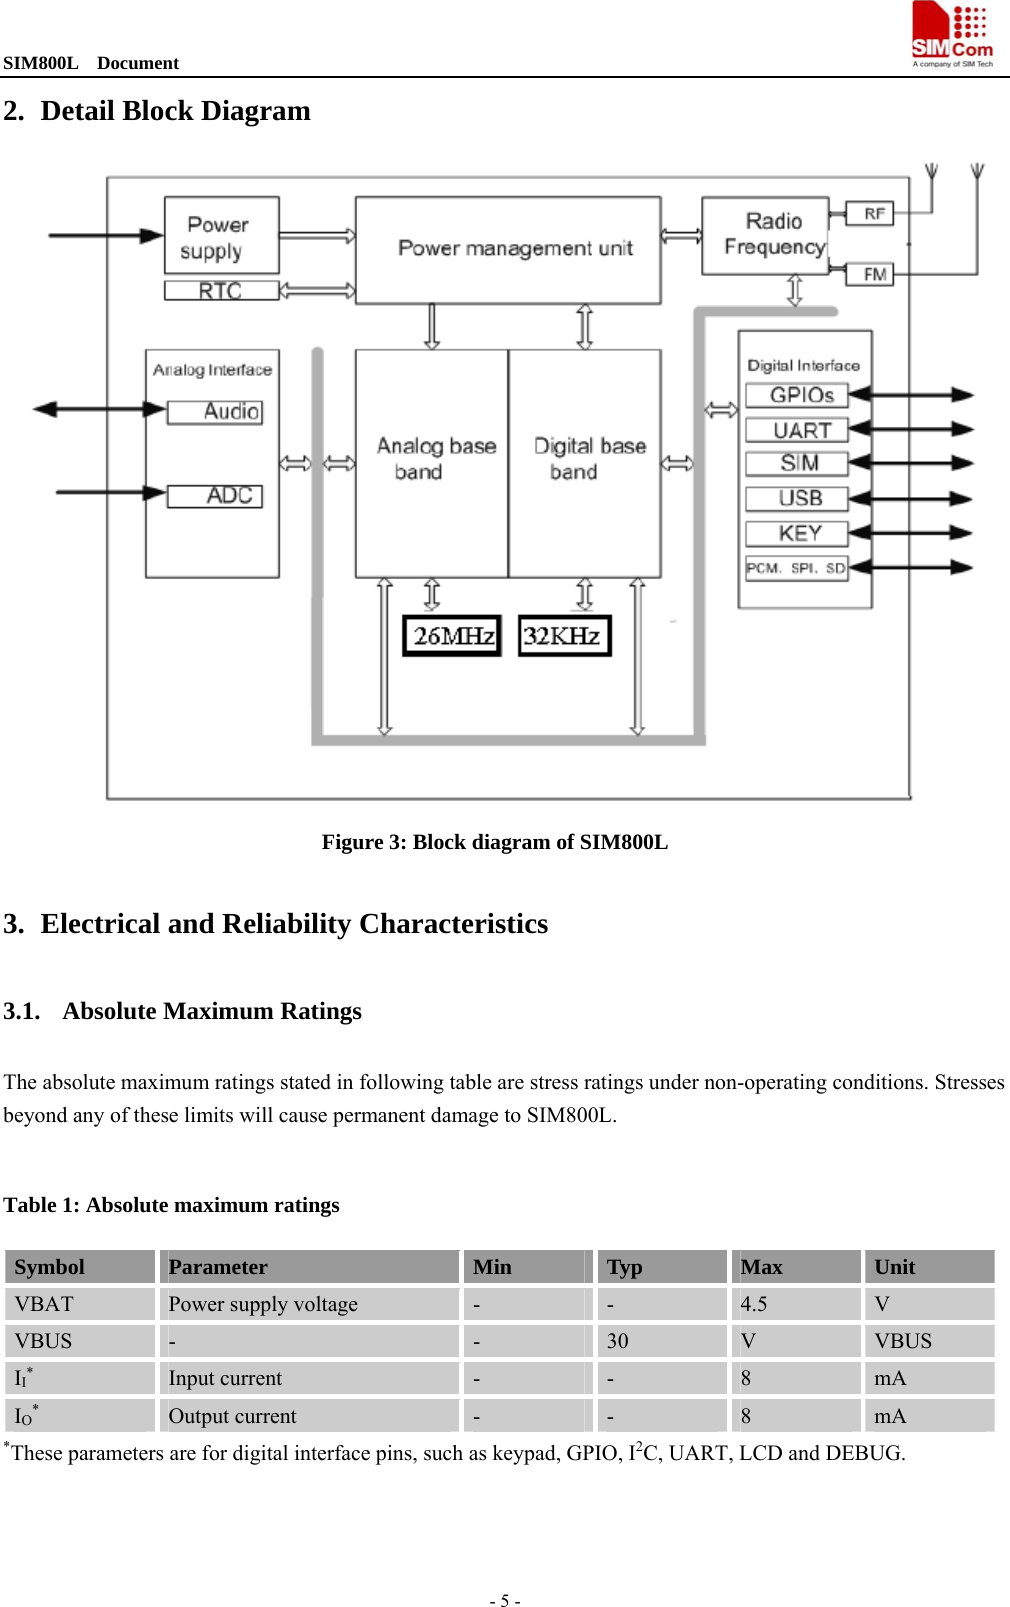 SIM800L  Document                                                                                - 5 - 2. Detail Block Diagram  Figure 3: Block diagram of SIM800L  3. Electrical and Reliability Characteristics 3.1. Absolute Maximum Ratings The absolute maximum ratings stated in following table are stress ratings under non-operating conditions. Stresses beyond any of these limits will cause permanent damage to SIM800L.  Table 1: Absolute maximum ratings Symbol  Parameter  Min  Typ  Max  Unit VBAT  Power supply voltage  -  -  4.5  V VBUS  -  -  30  V  VBUS II* Input current  -  -  8  mA IO* Output current  -  -  8  mA *These parameters are for digital interface pins, such as keypad, GPIO, I2C, UART, LCD and DEBUG. 